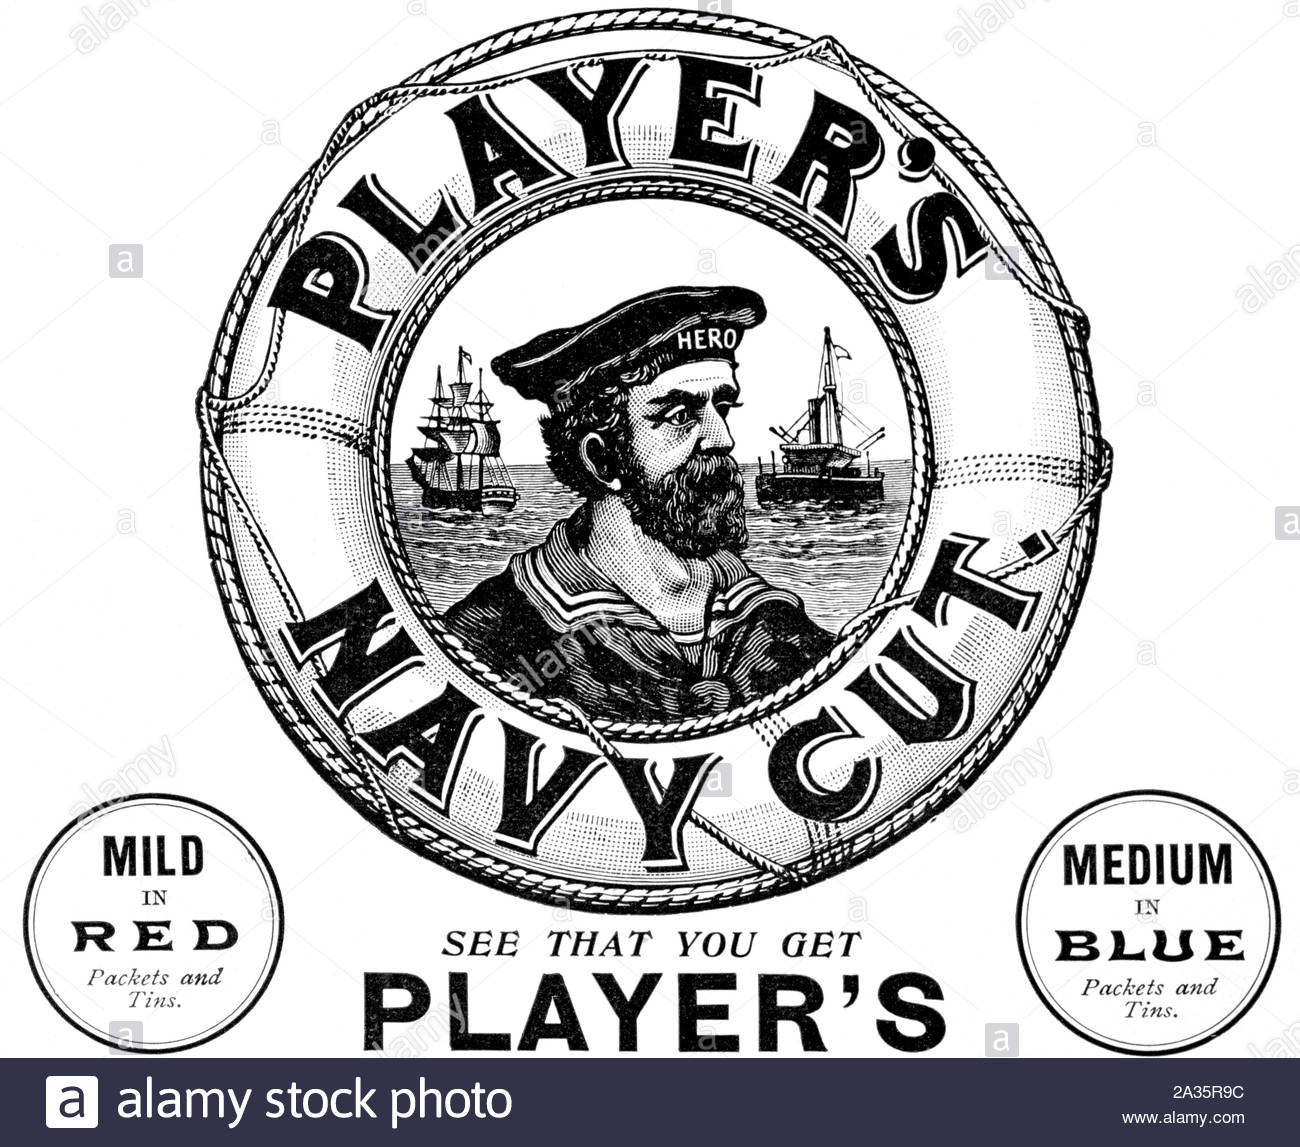 Victorian era, Player's Navy Cut tobacco, vintage advertising from 1899 Stock Photo